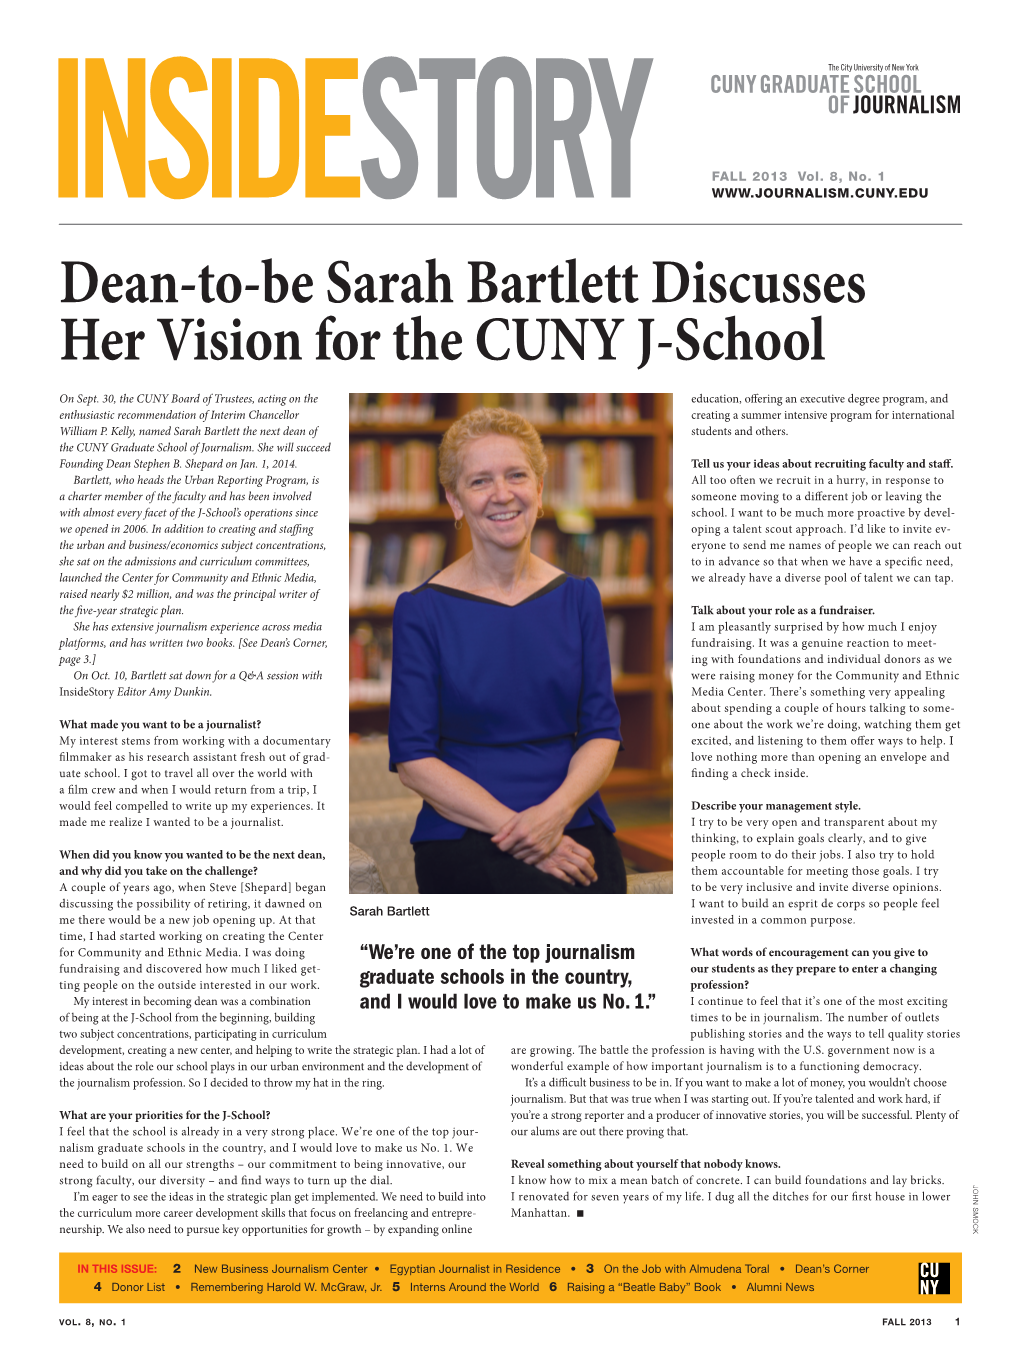 Dean-To-Be Sarah Bartlett Discusses Her Vision for the CUNY J-School